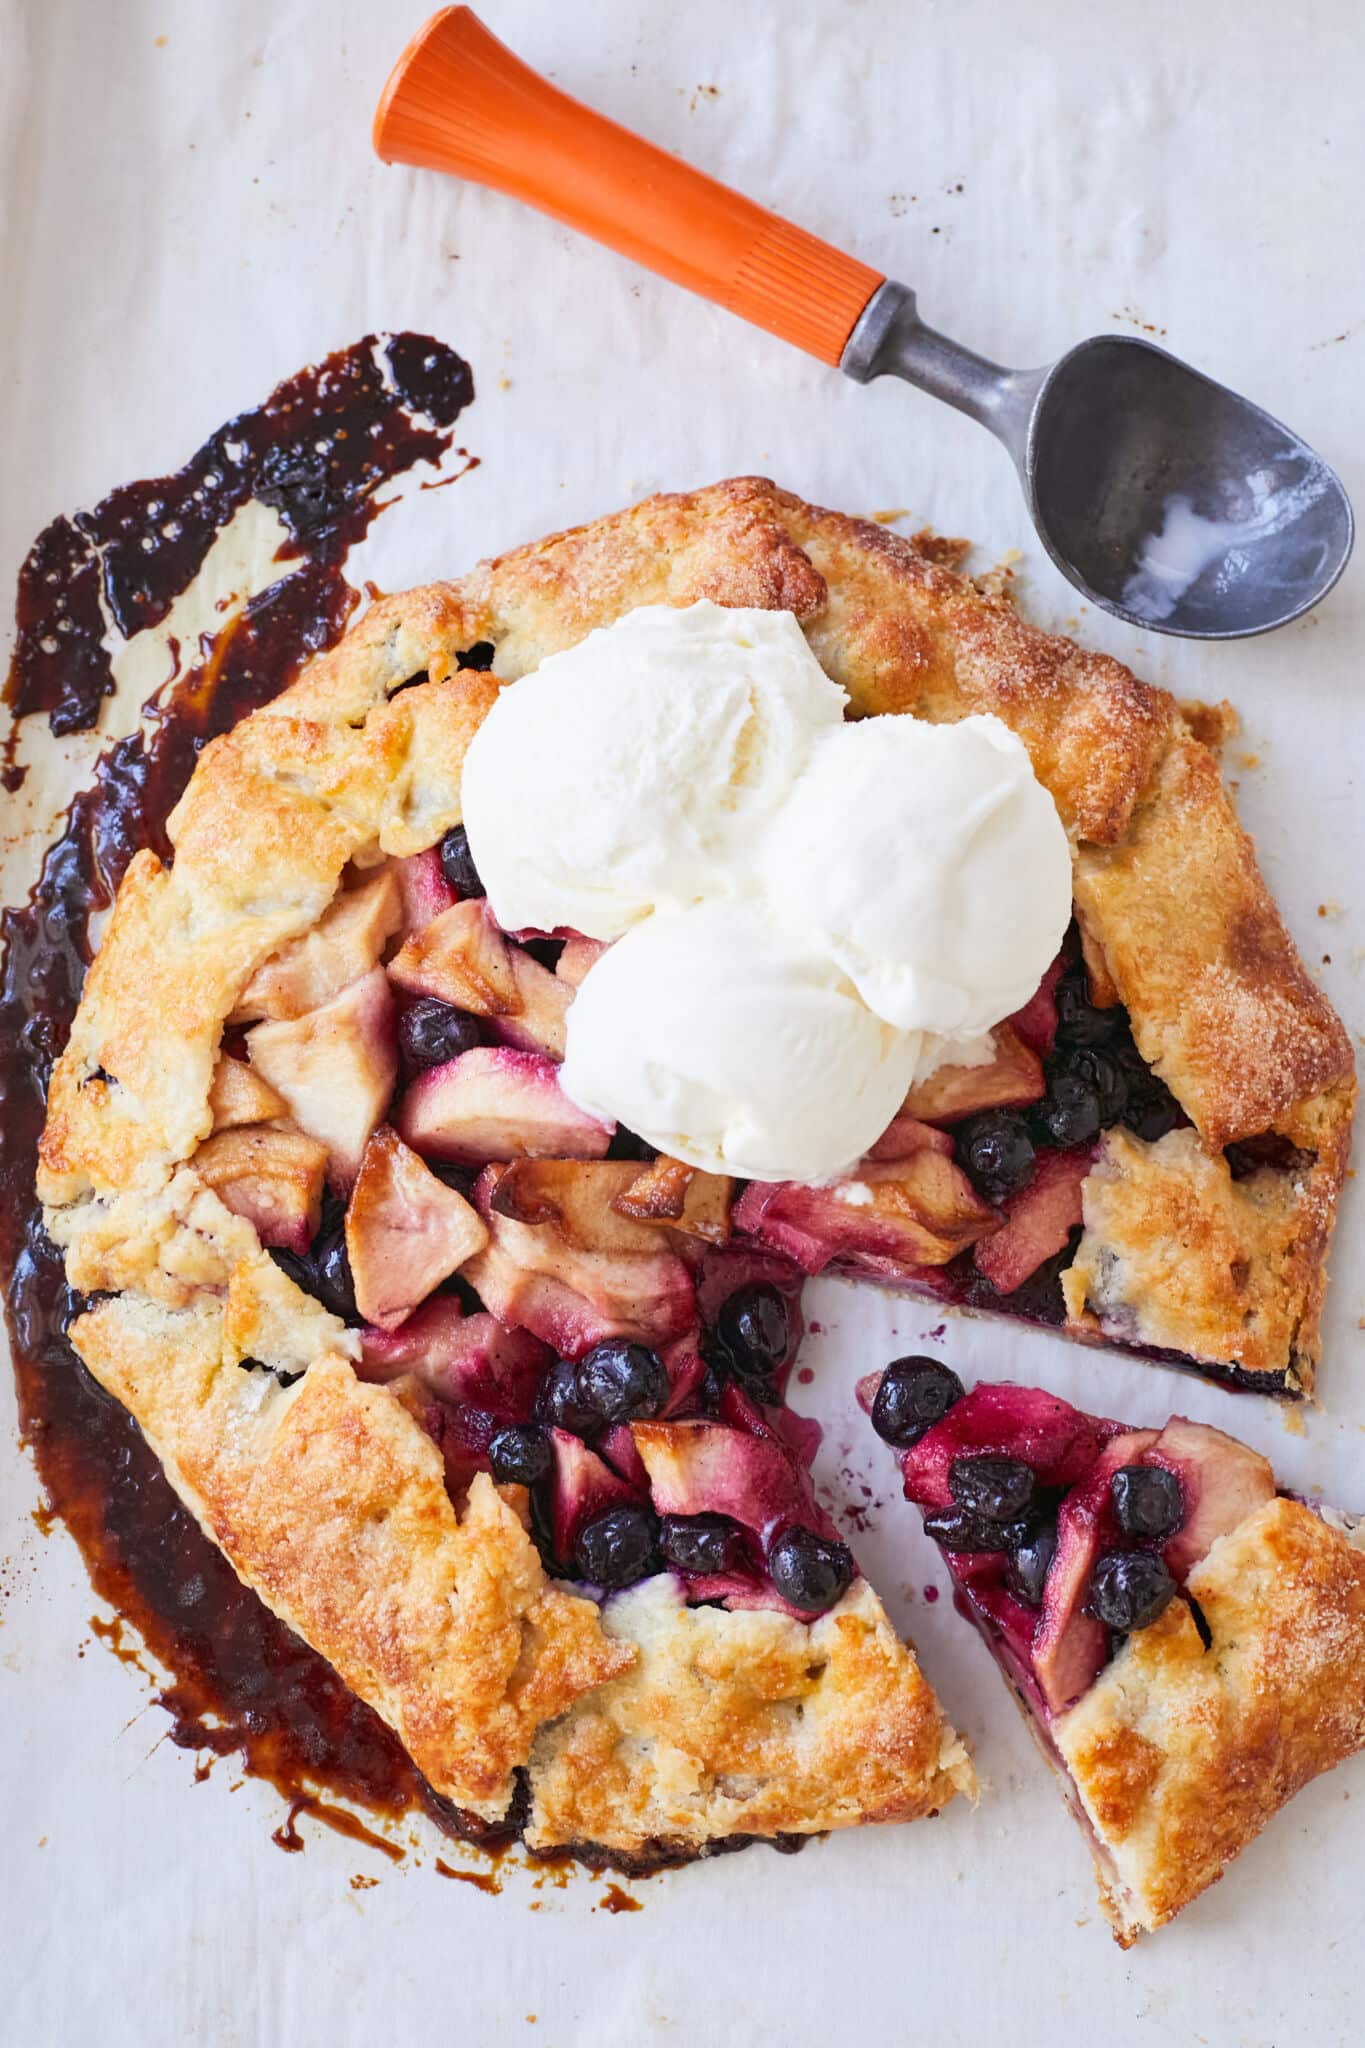 An Apple Blueberry and Vanilla Bean Galette is baked golden brown on the edges with juicy bubbling apples and blueberries in the center. It's topped with 3 big scoops of vanilla ice cream. A piece was sliced off the whole galette, ready for serving. 